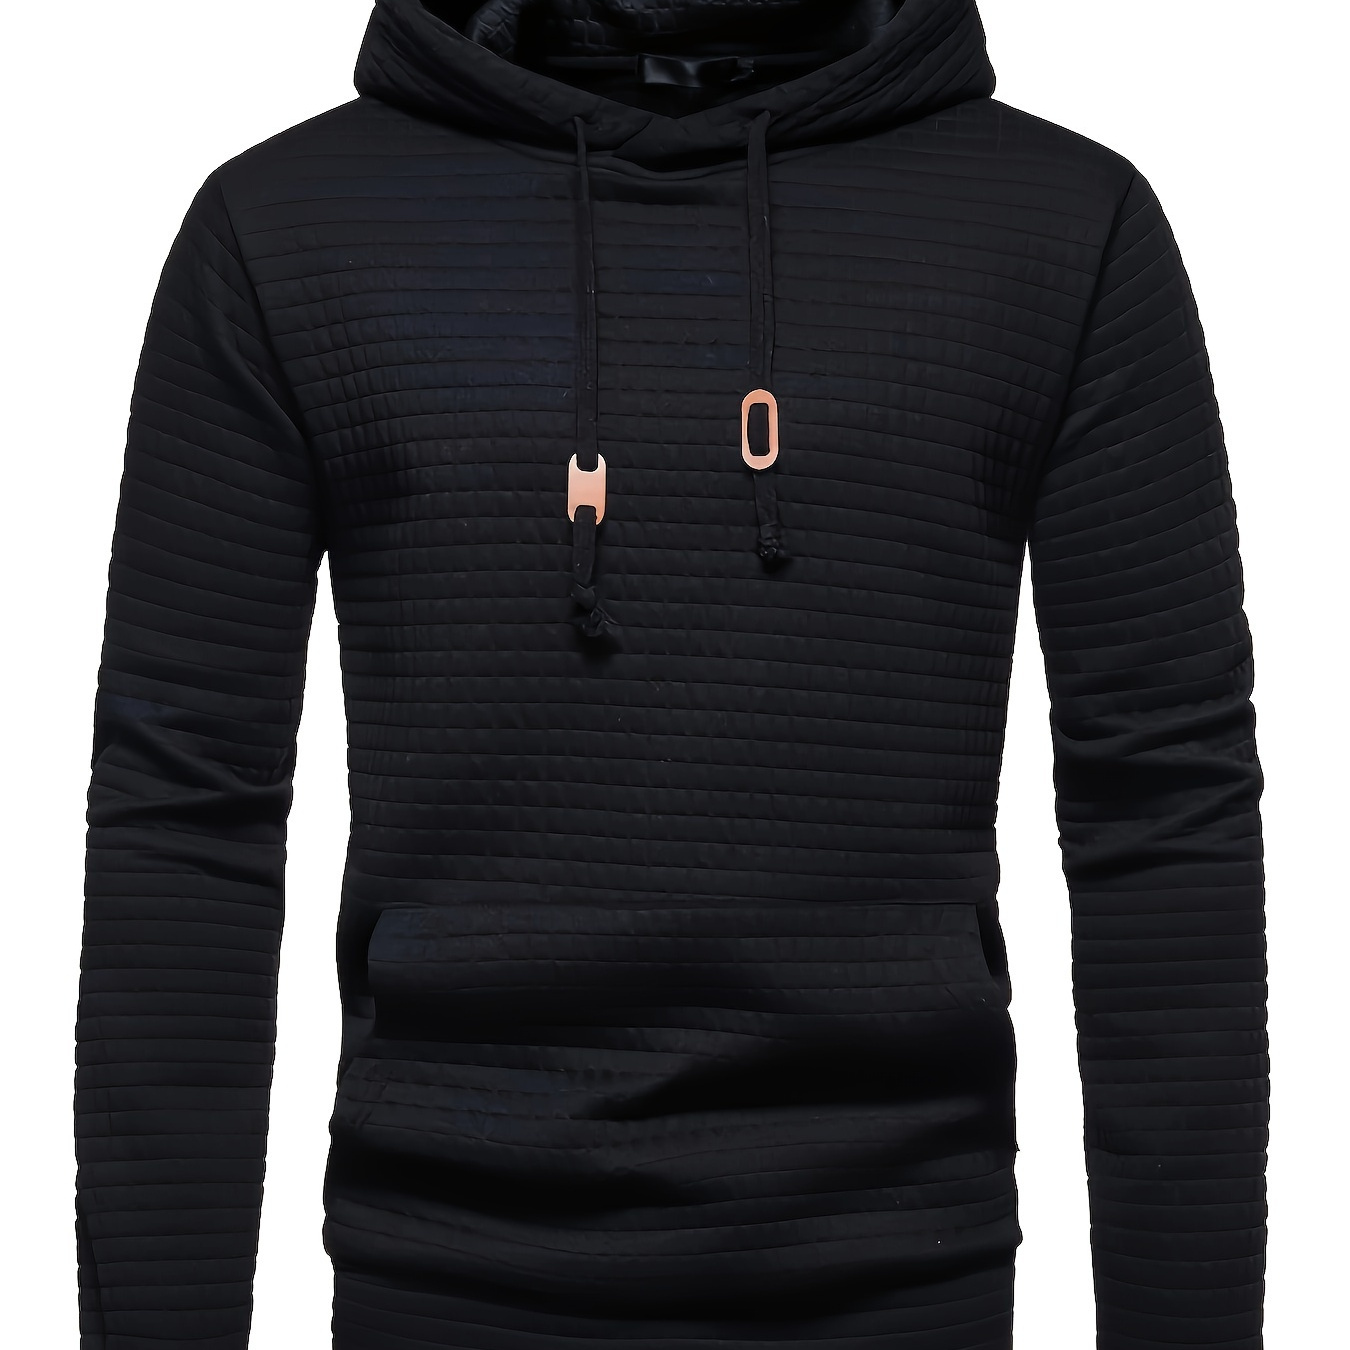 

Cool Waffle Hoodies For Men, Men's Casua Color Block Design Hooded Sweatshirt With Kangaroo Pocket Streetwear For Winter Fall, As Gifts